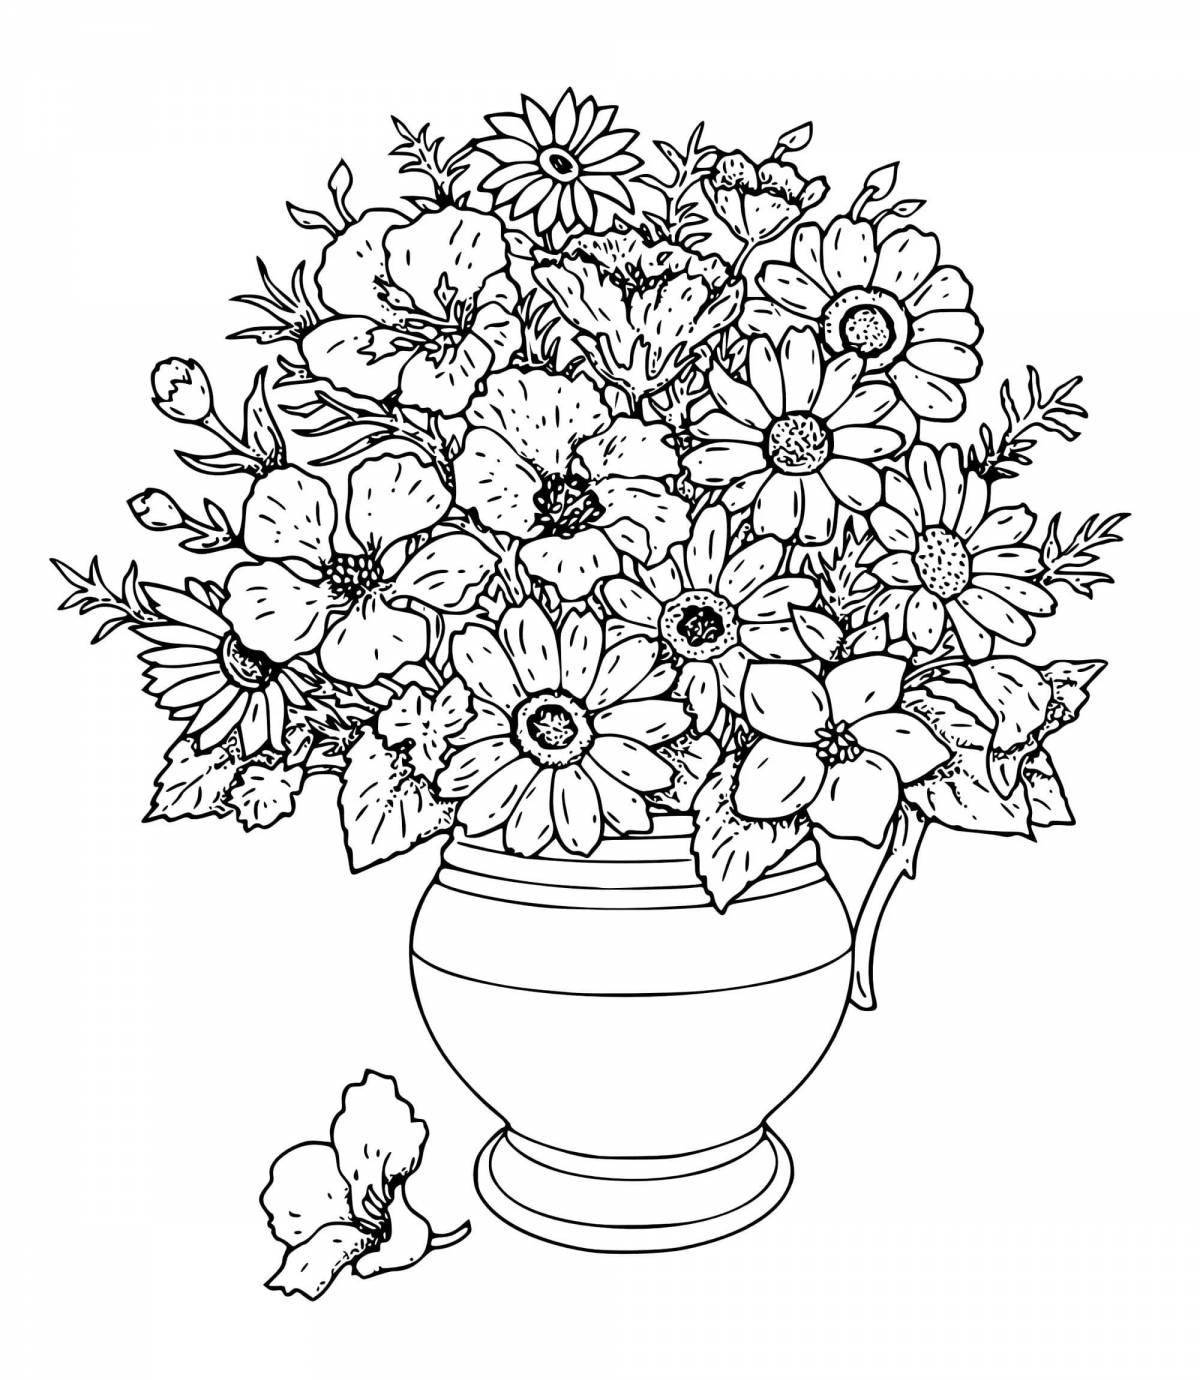 Coloring bouquet of daisies